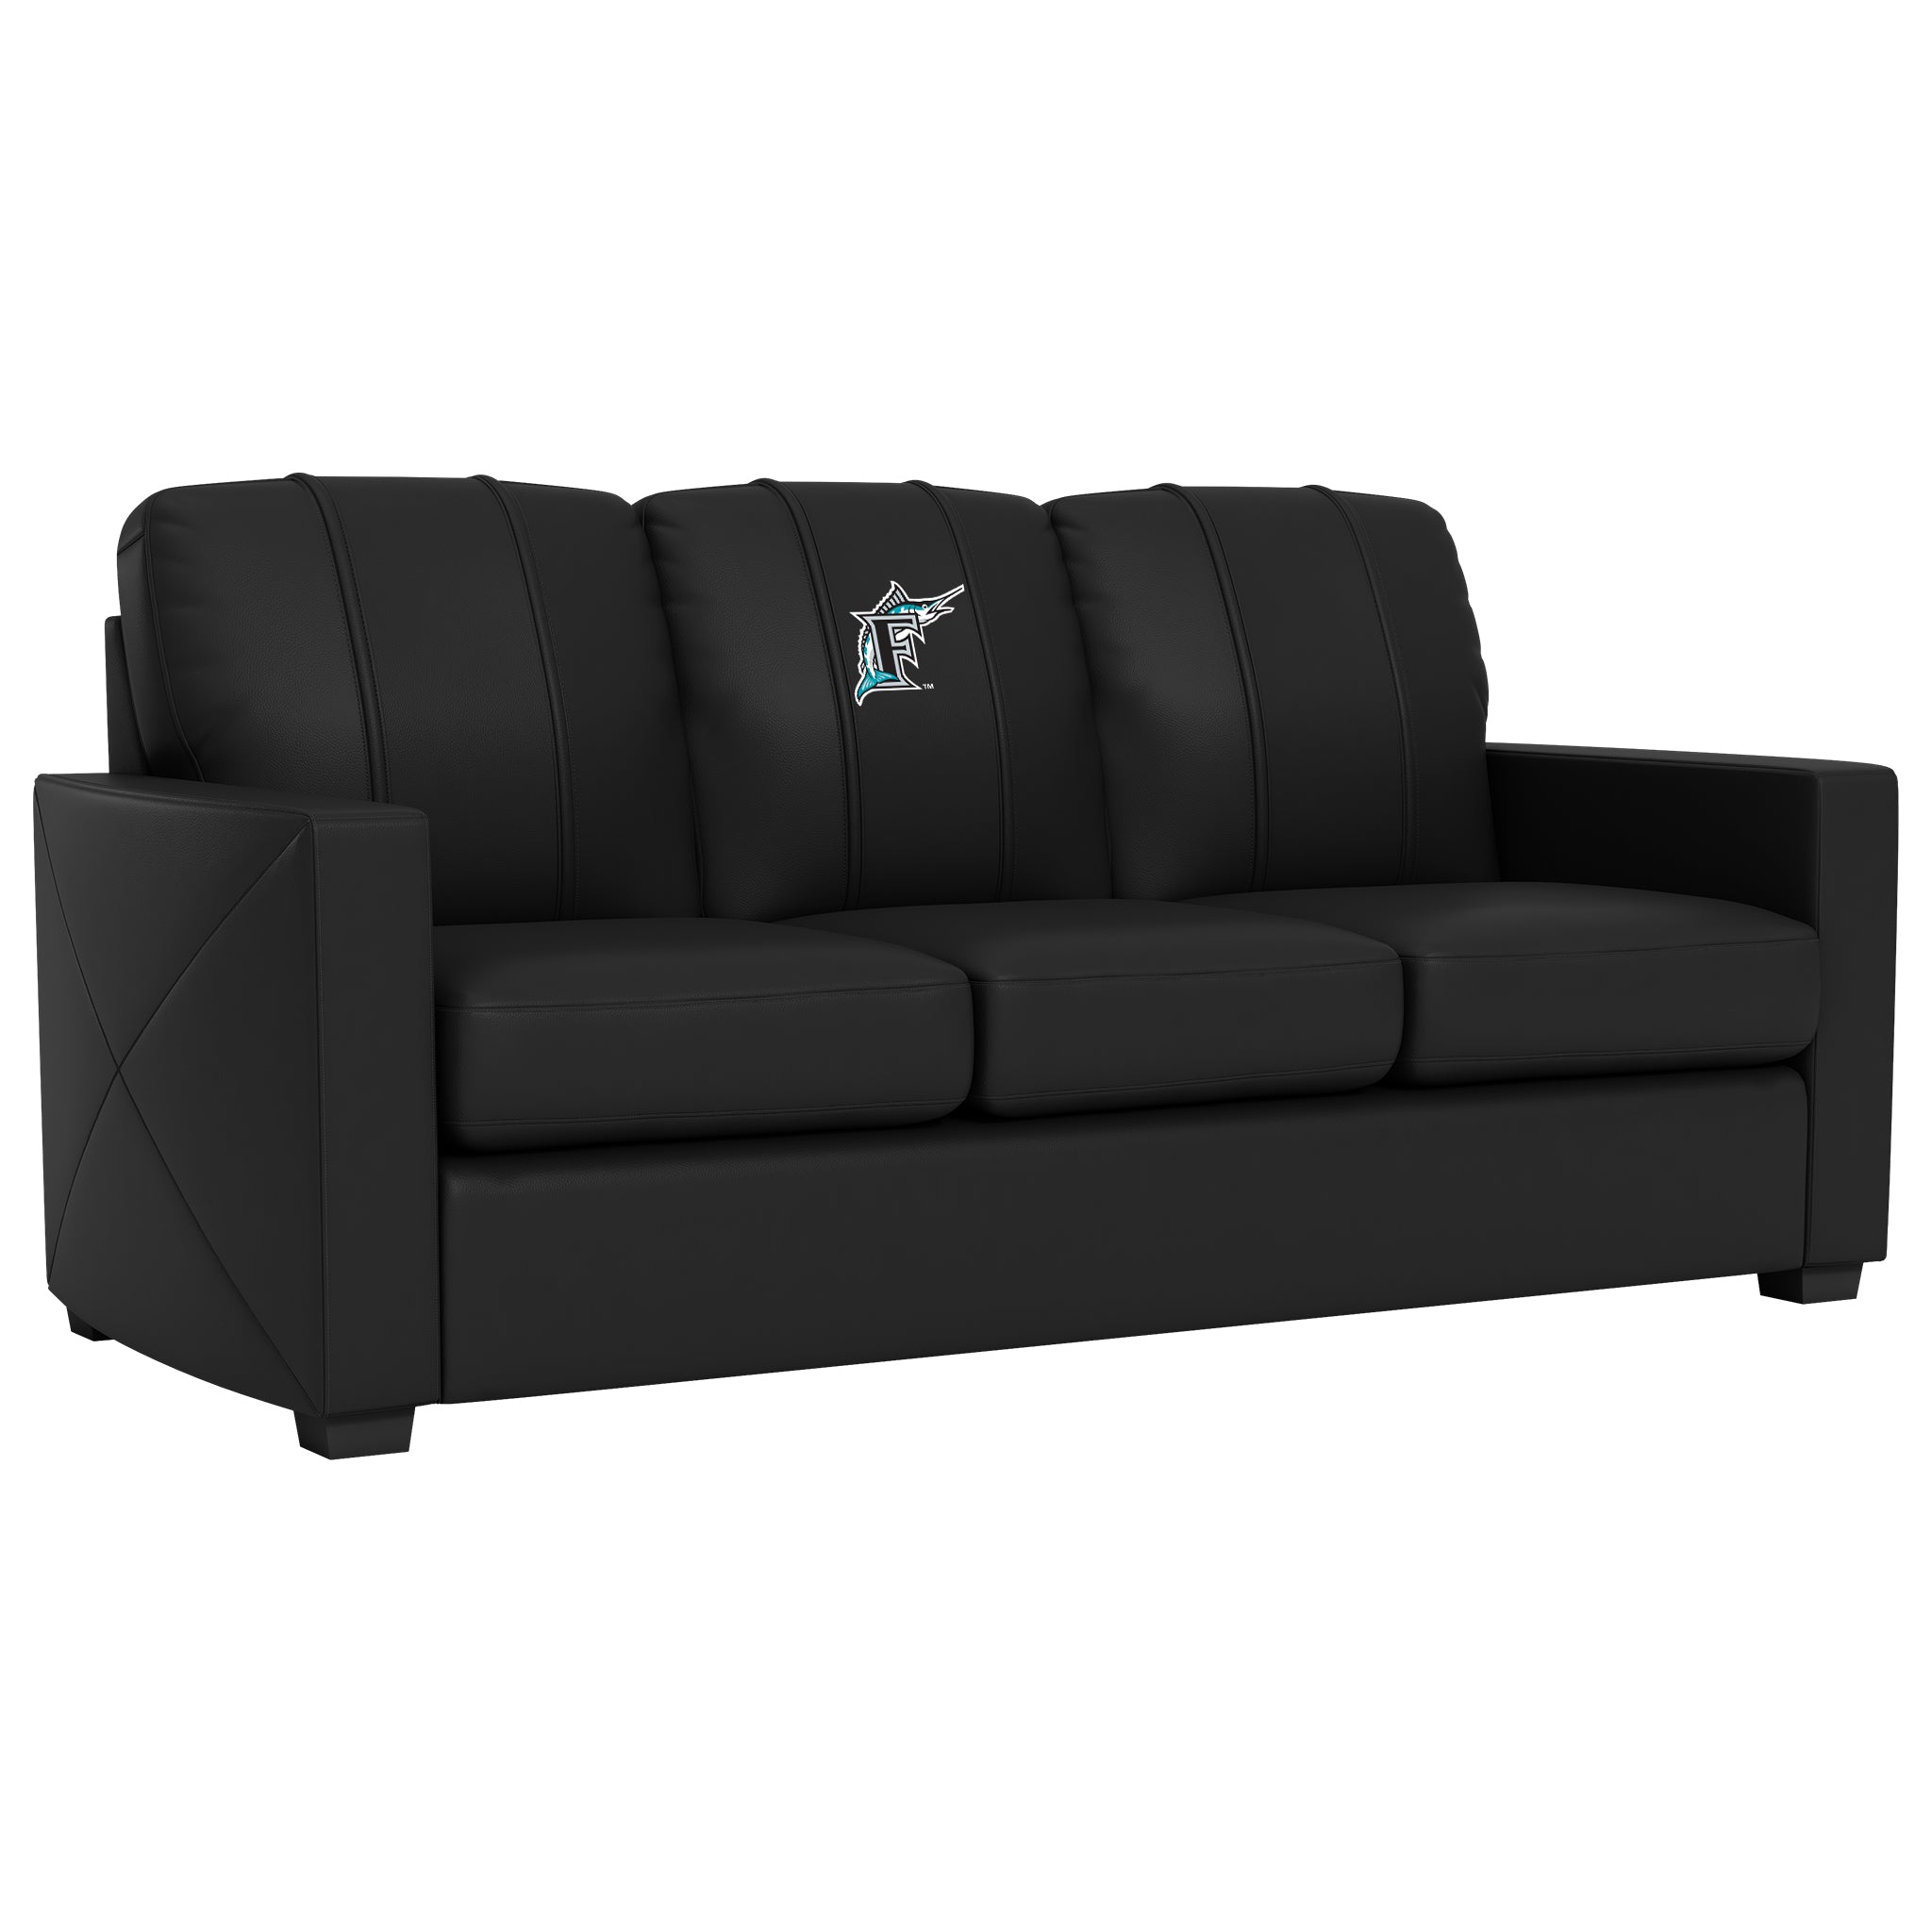 Silver Sofa with Florida Marlins Cooperstown Secondary